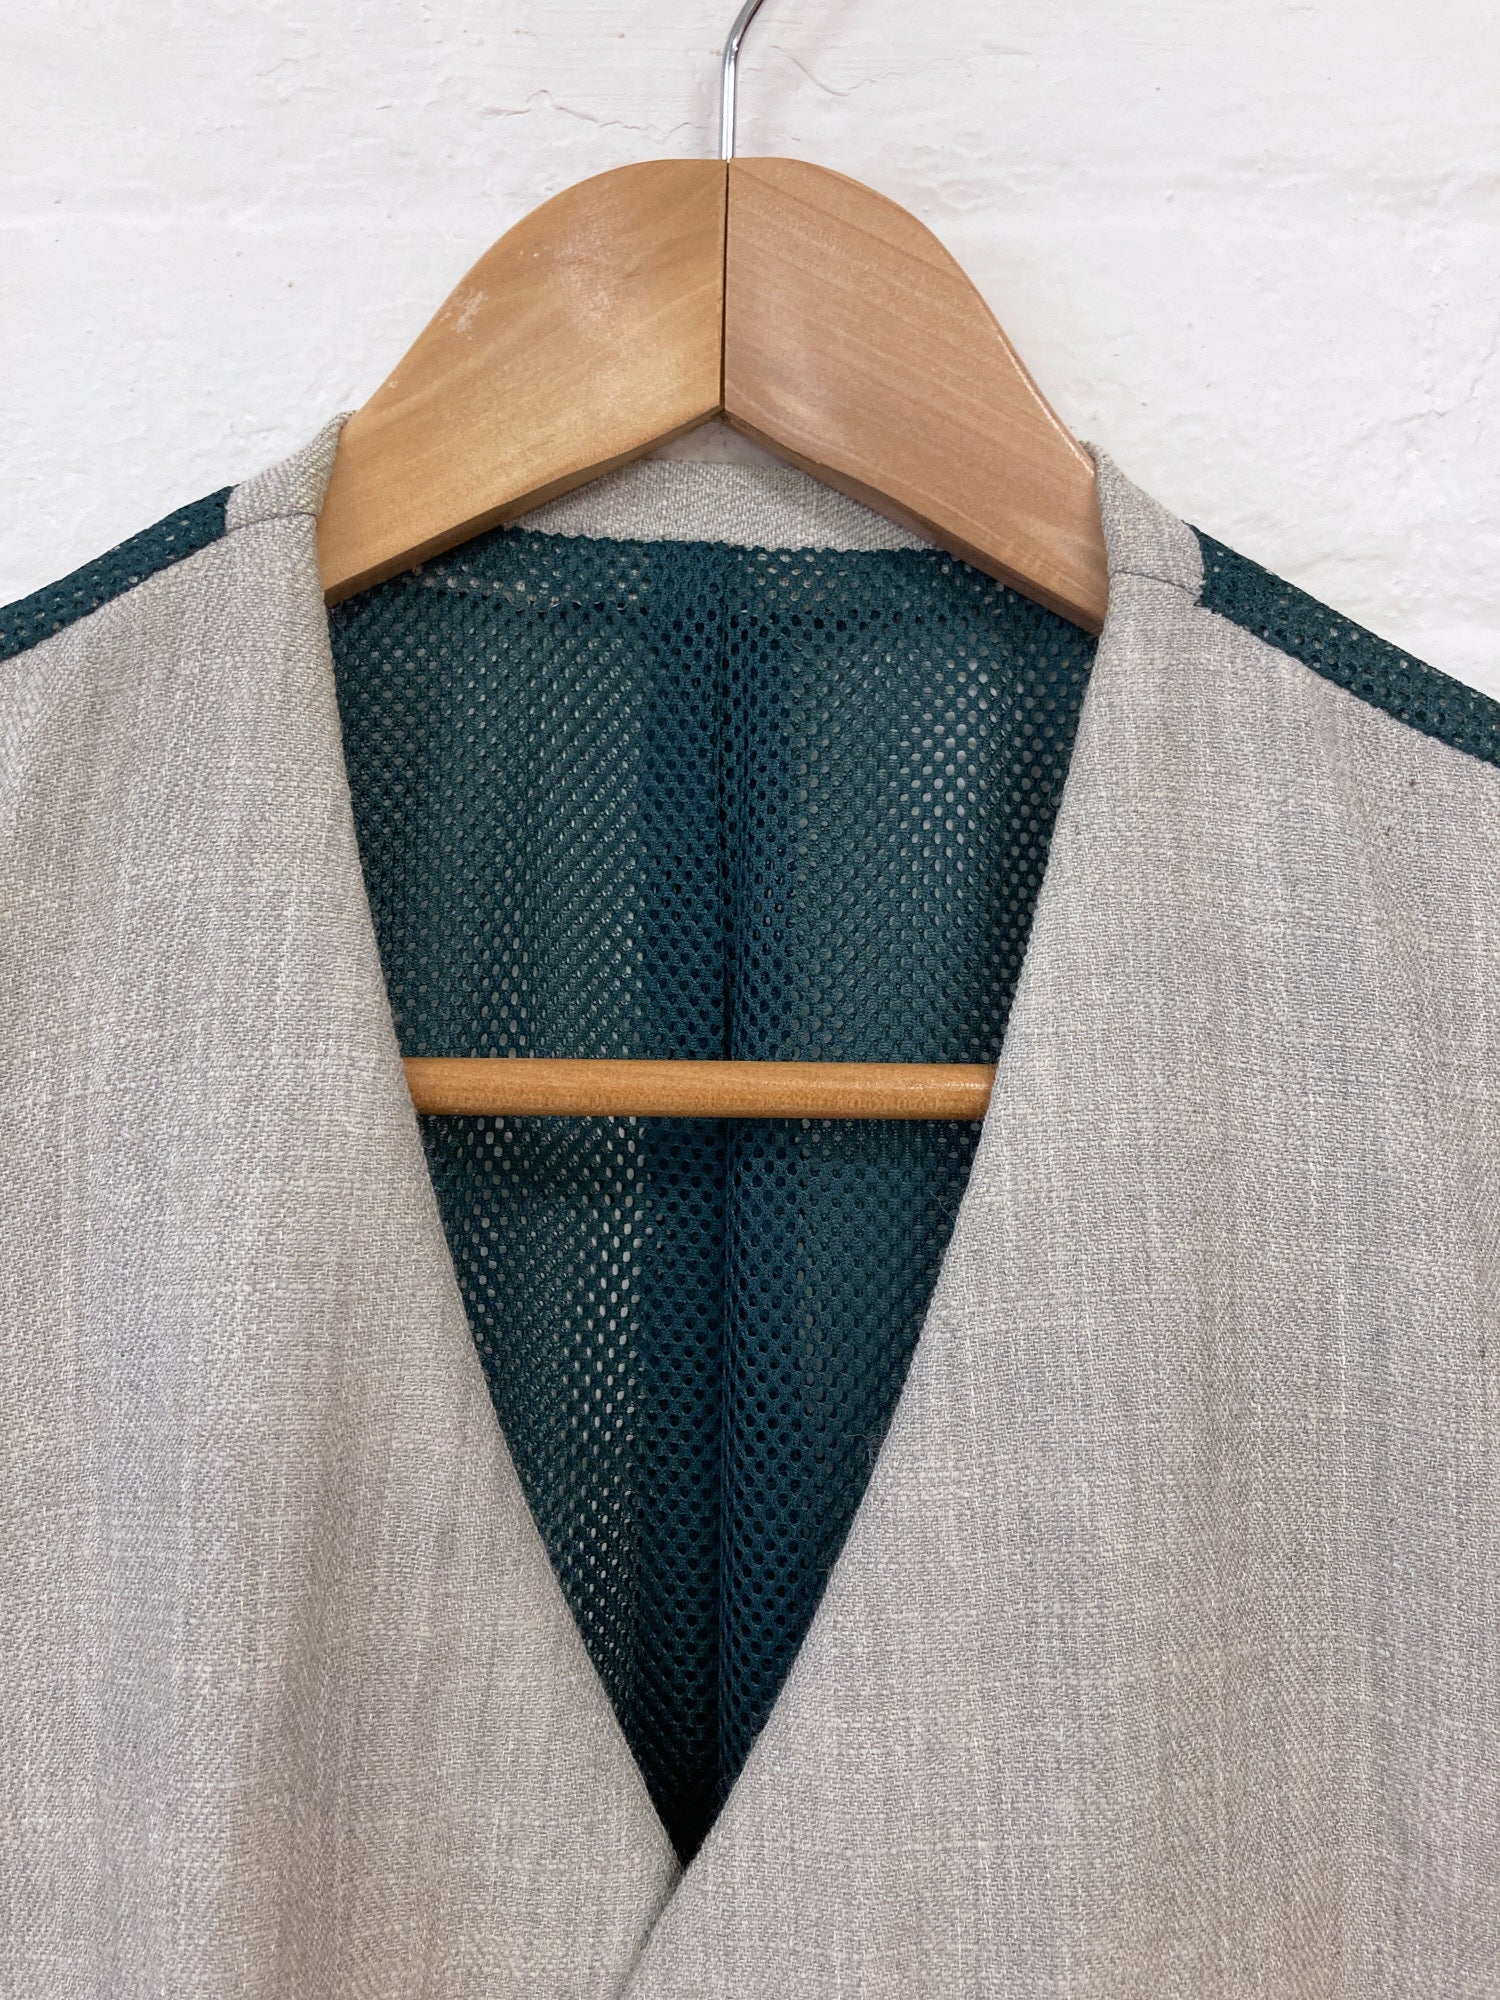 Comme des Garcons Homme Plus SS1996 grey wool vest with green mesh back - M